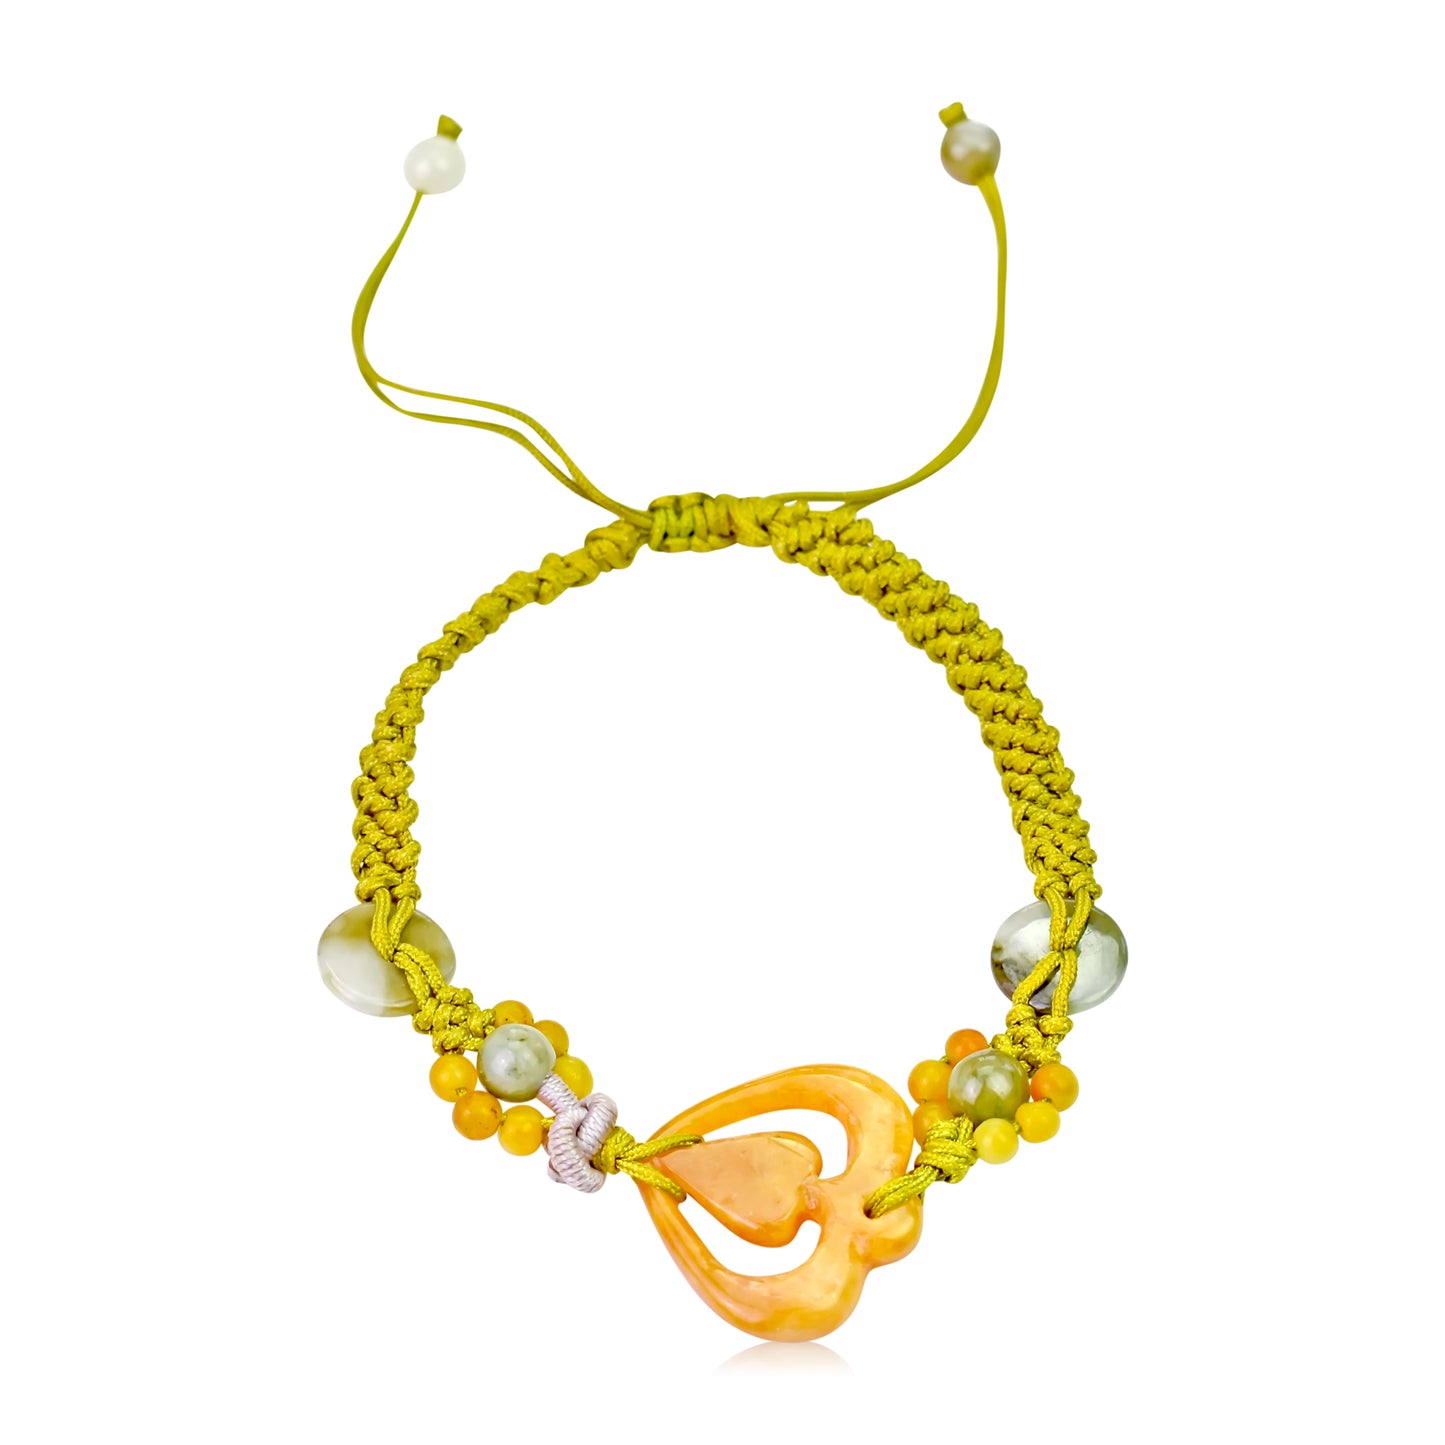 Get Ready for Love with the Heart Honey Jade Bracelet made with Lime Cord